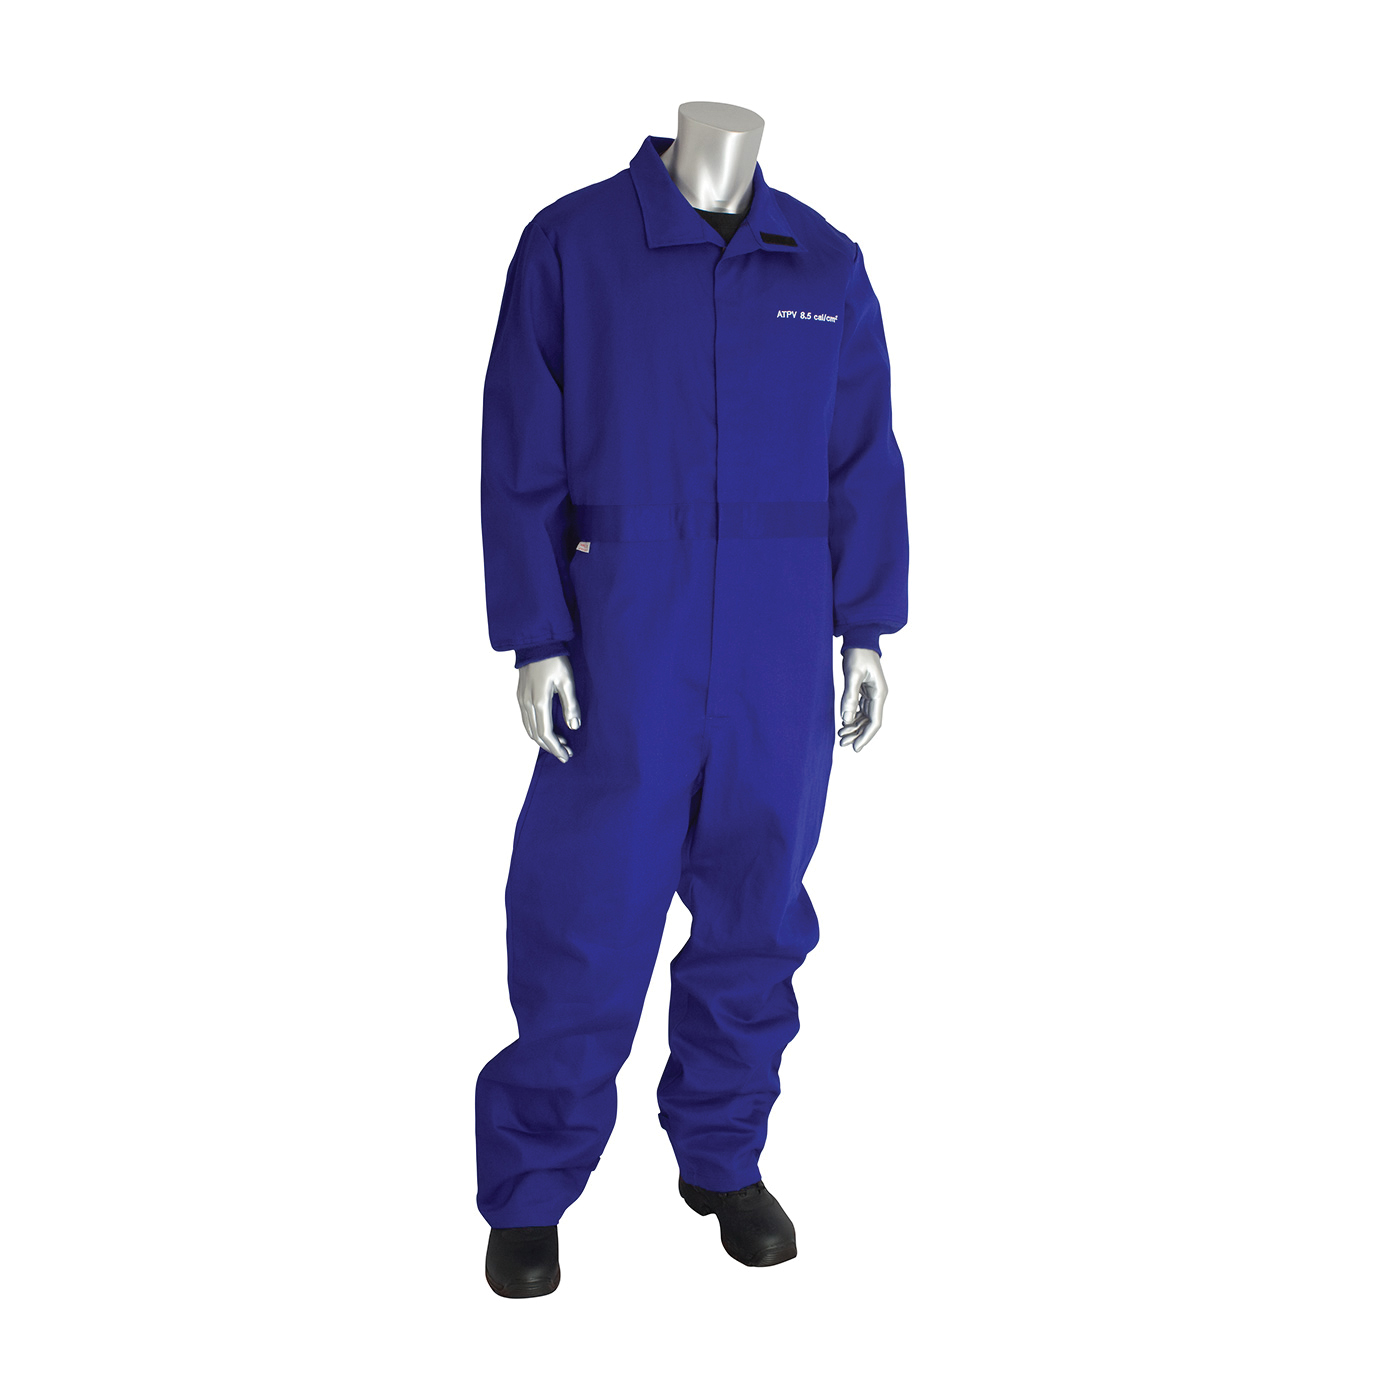 PIP® 9100-2120D/M Flame Resistant Coverall With Vented Back, M, Royal Blue, 90% Cotton/10% Nylon/FR Twill Weave, 40 to 42 in Chest, 32 in L Inseam